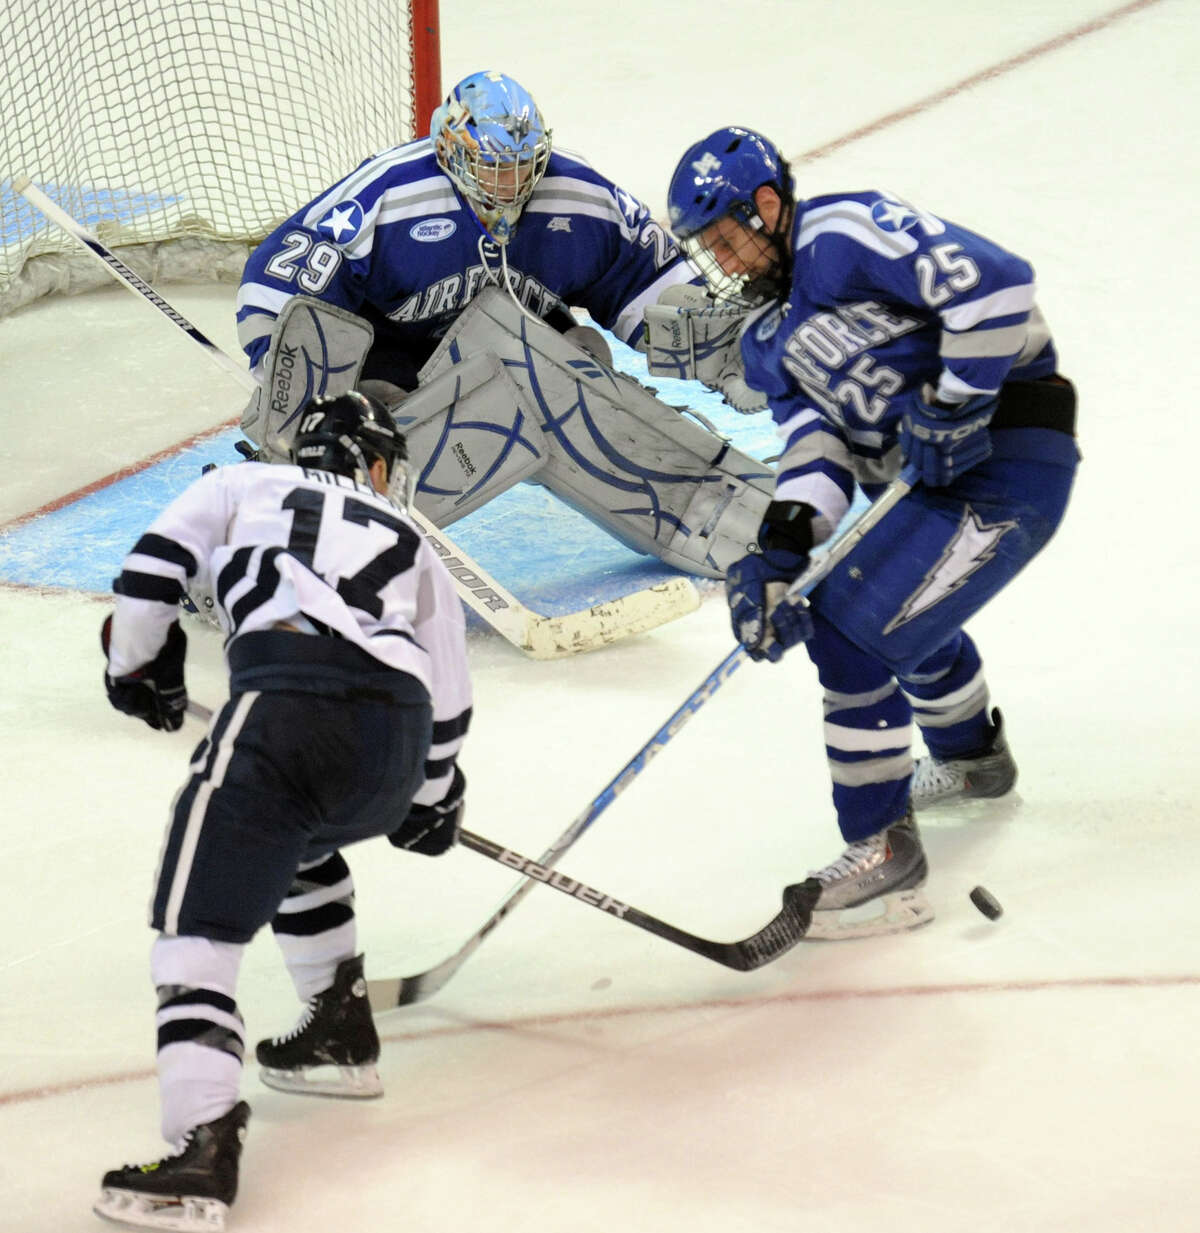 Highlights from NCAA hockey tournament action between Yale and Air Force at the Webster Bank Arena at Harbor Yard in Bridgeport on Friday March 26, 2011.